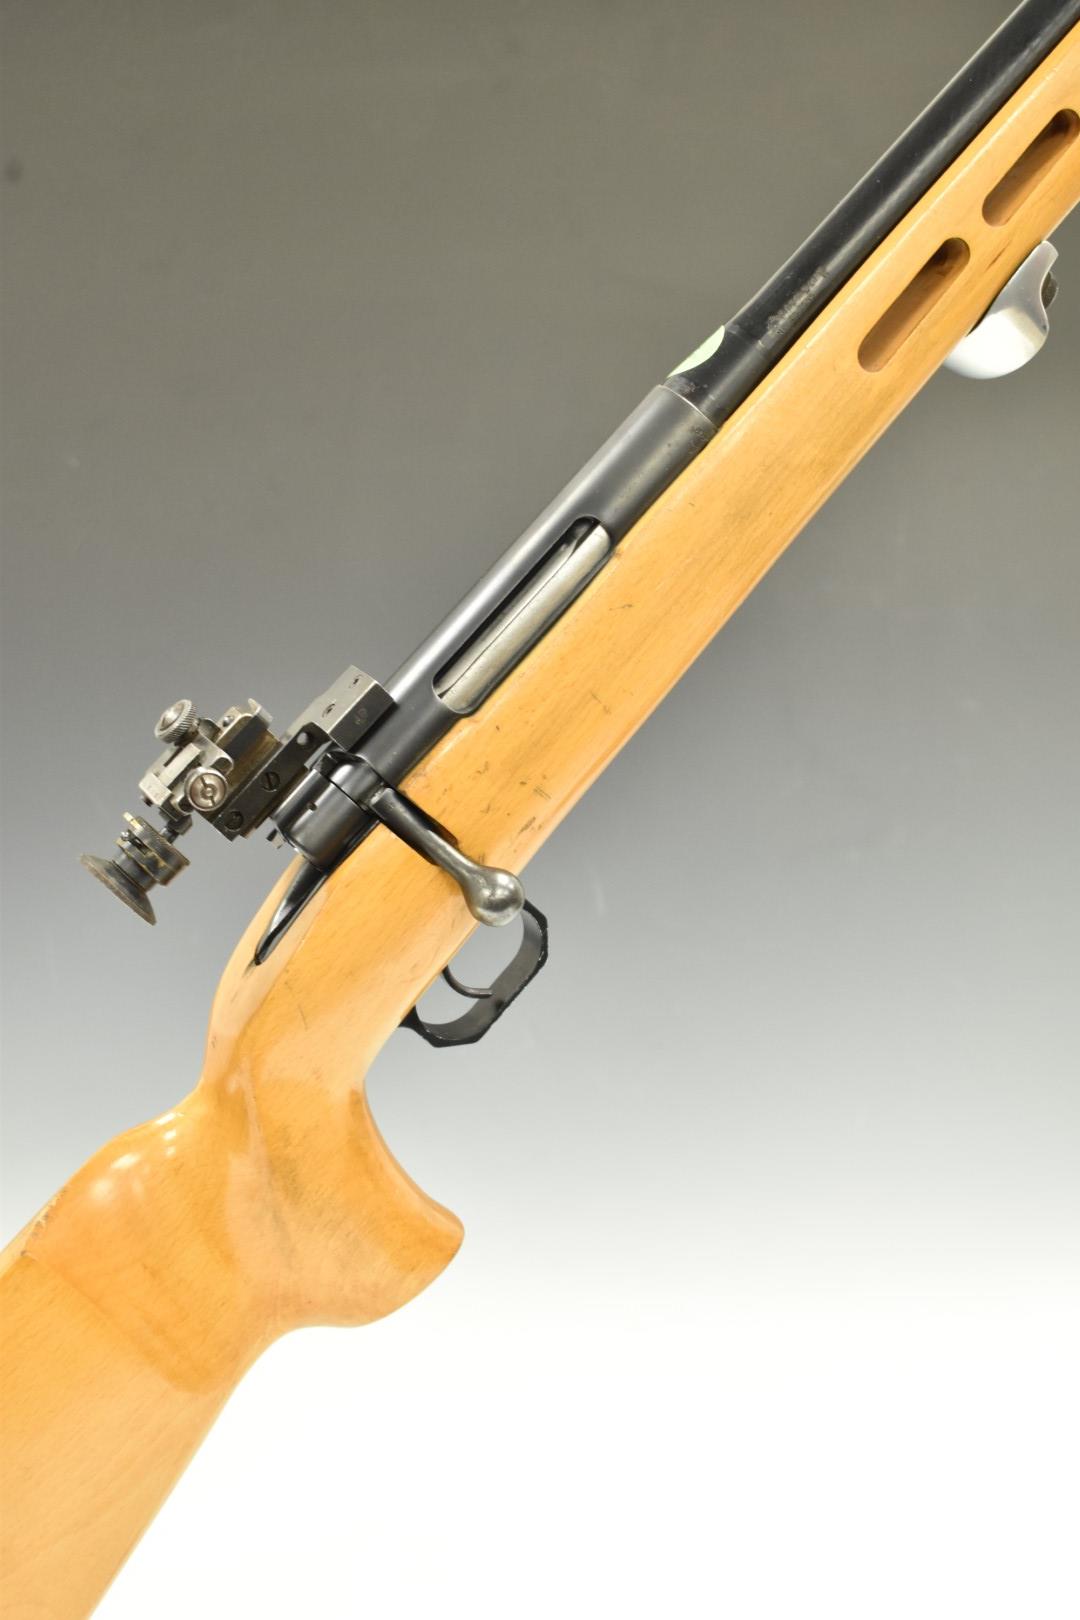 Musgrave 7.62mm bolt-action target rifle with semi-pistol grip, raised cheek piece, adjustable AJP